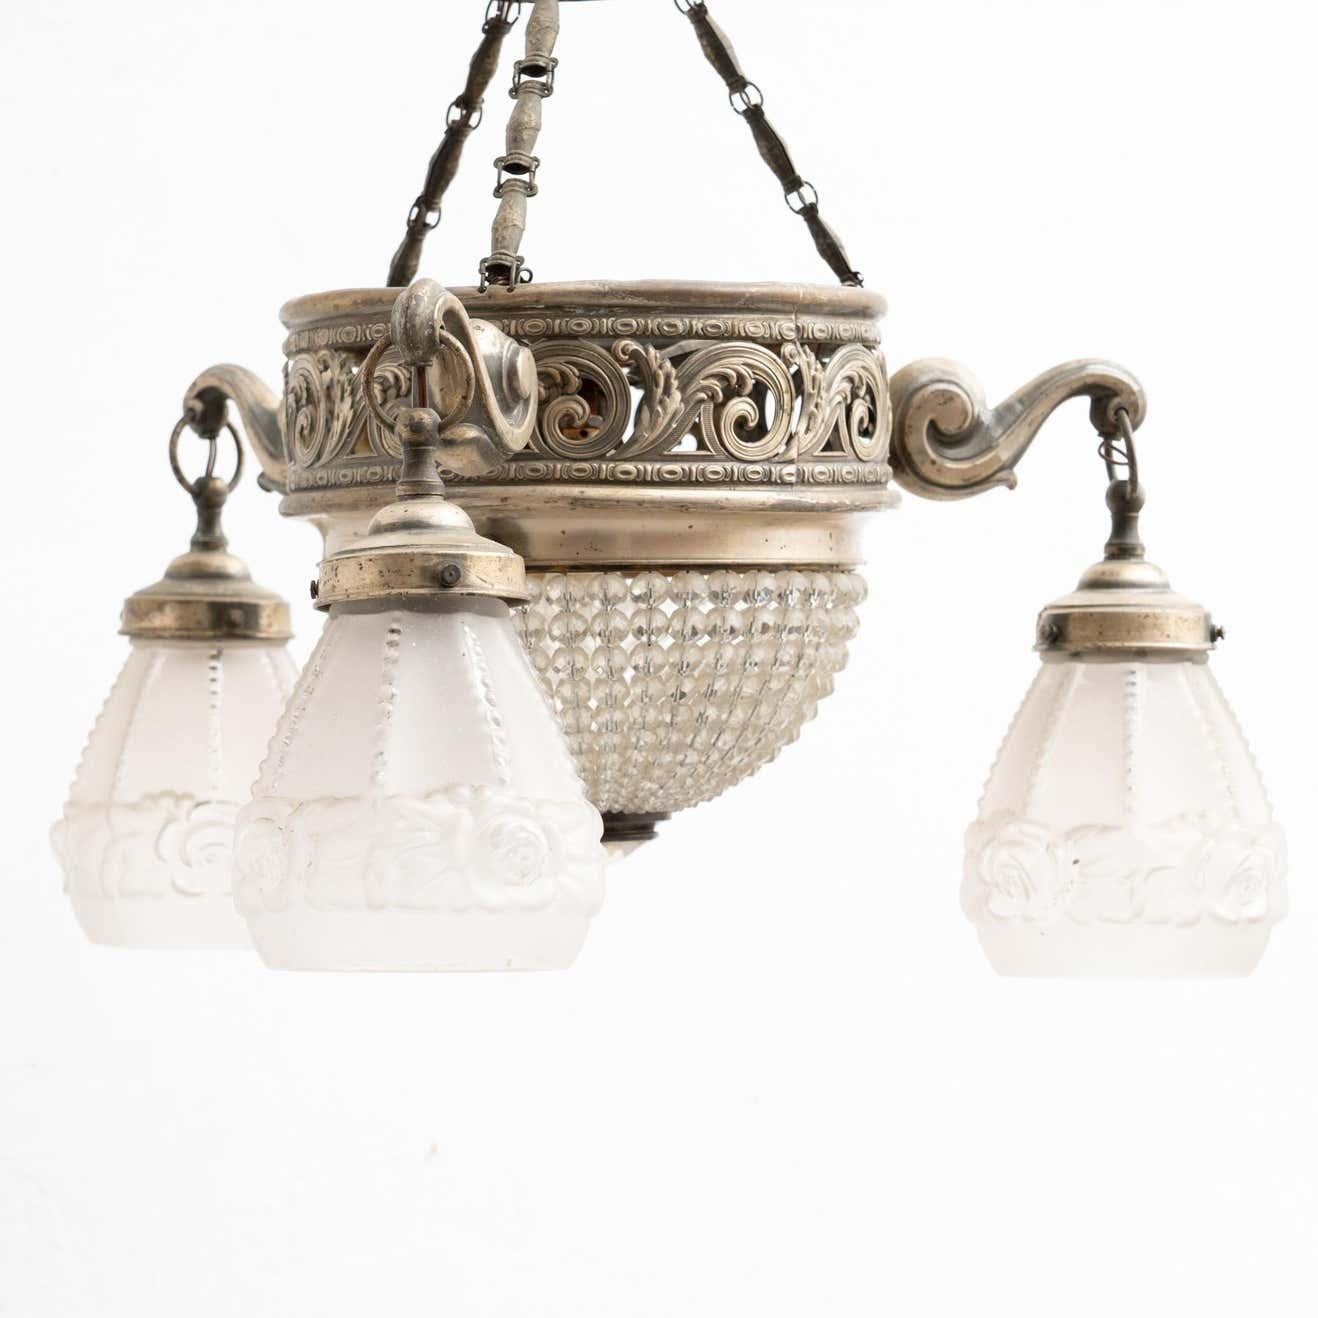 Vintage French Metal and Glass Art Deco Ceiling Lamp, circa 1930 For Sale 6